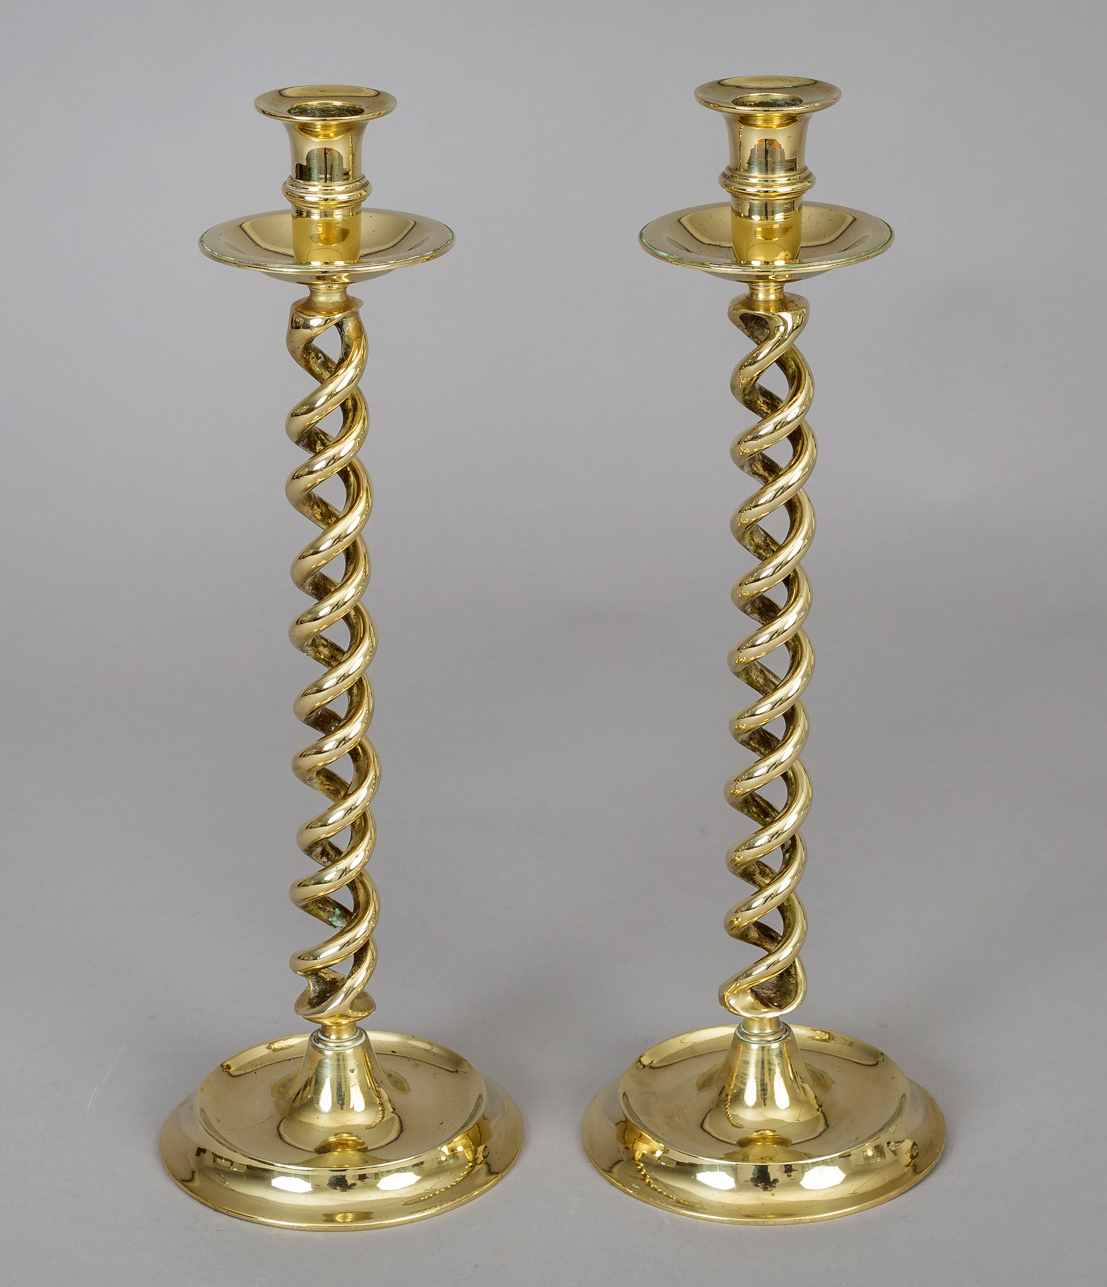 Lot - Pair of Brass Pricket Candlesticks, Pair of Quails and a Pair of  Bookends, H of Tallest: 10 in. (25.4 cm.)